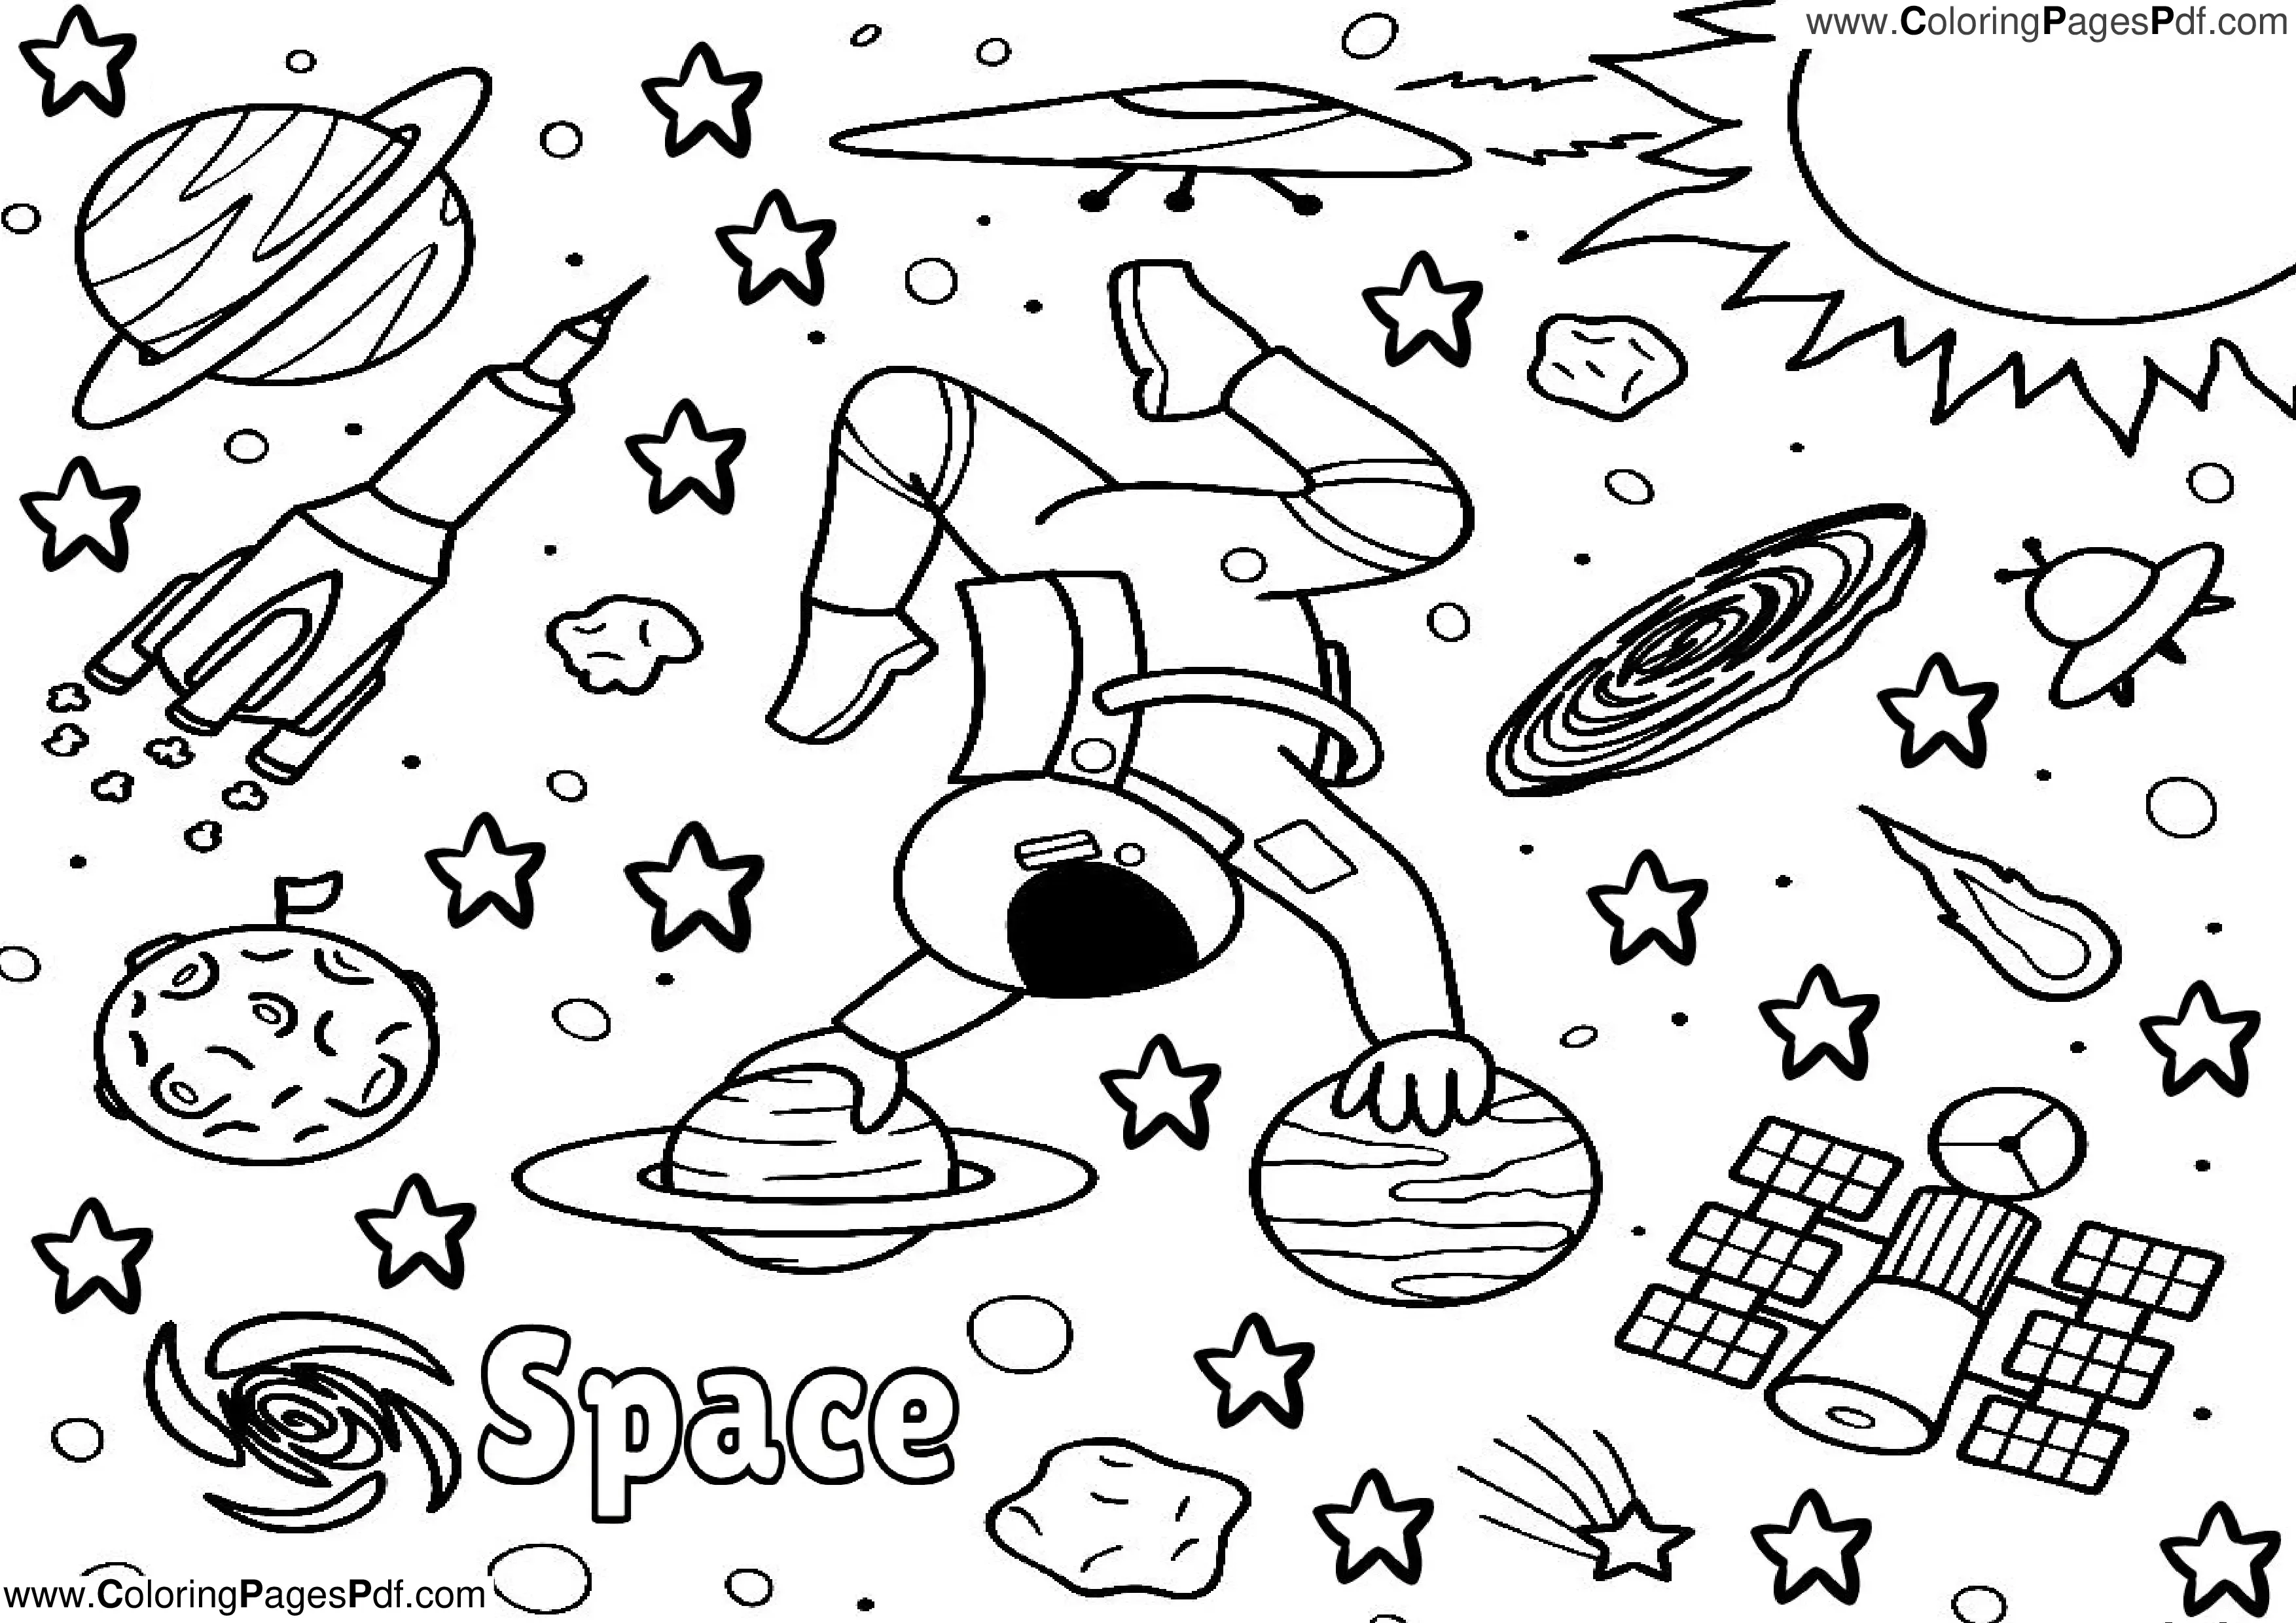 Space coloring pages for adults